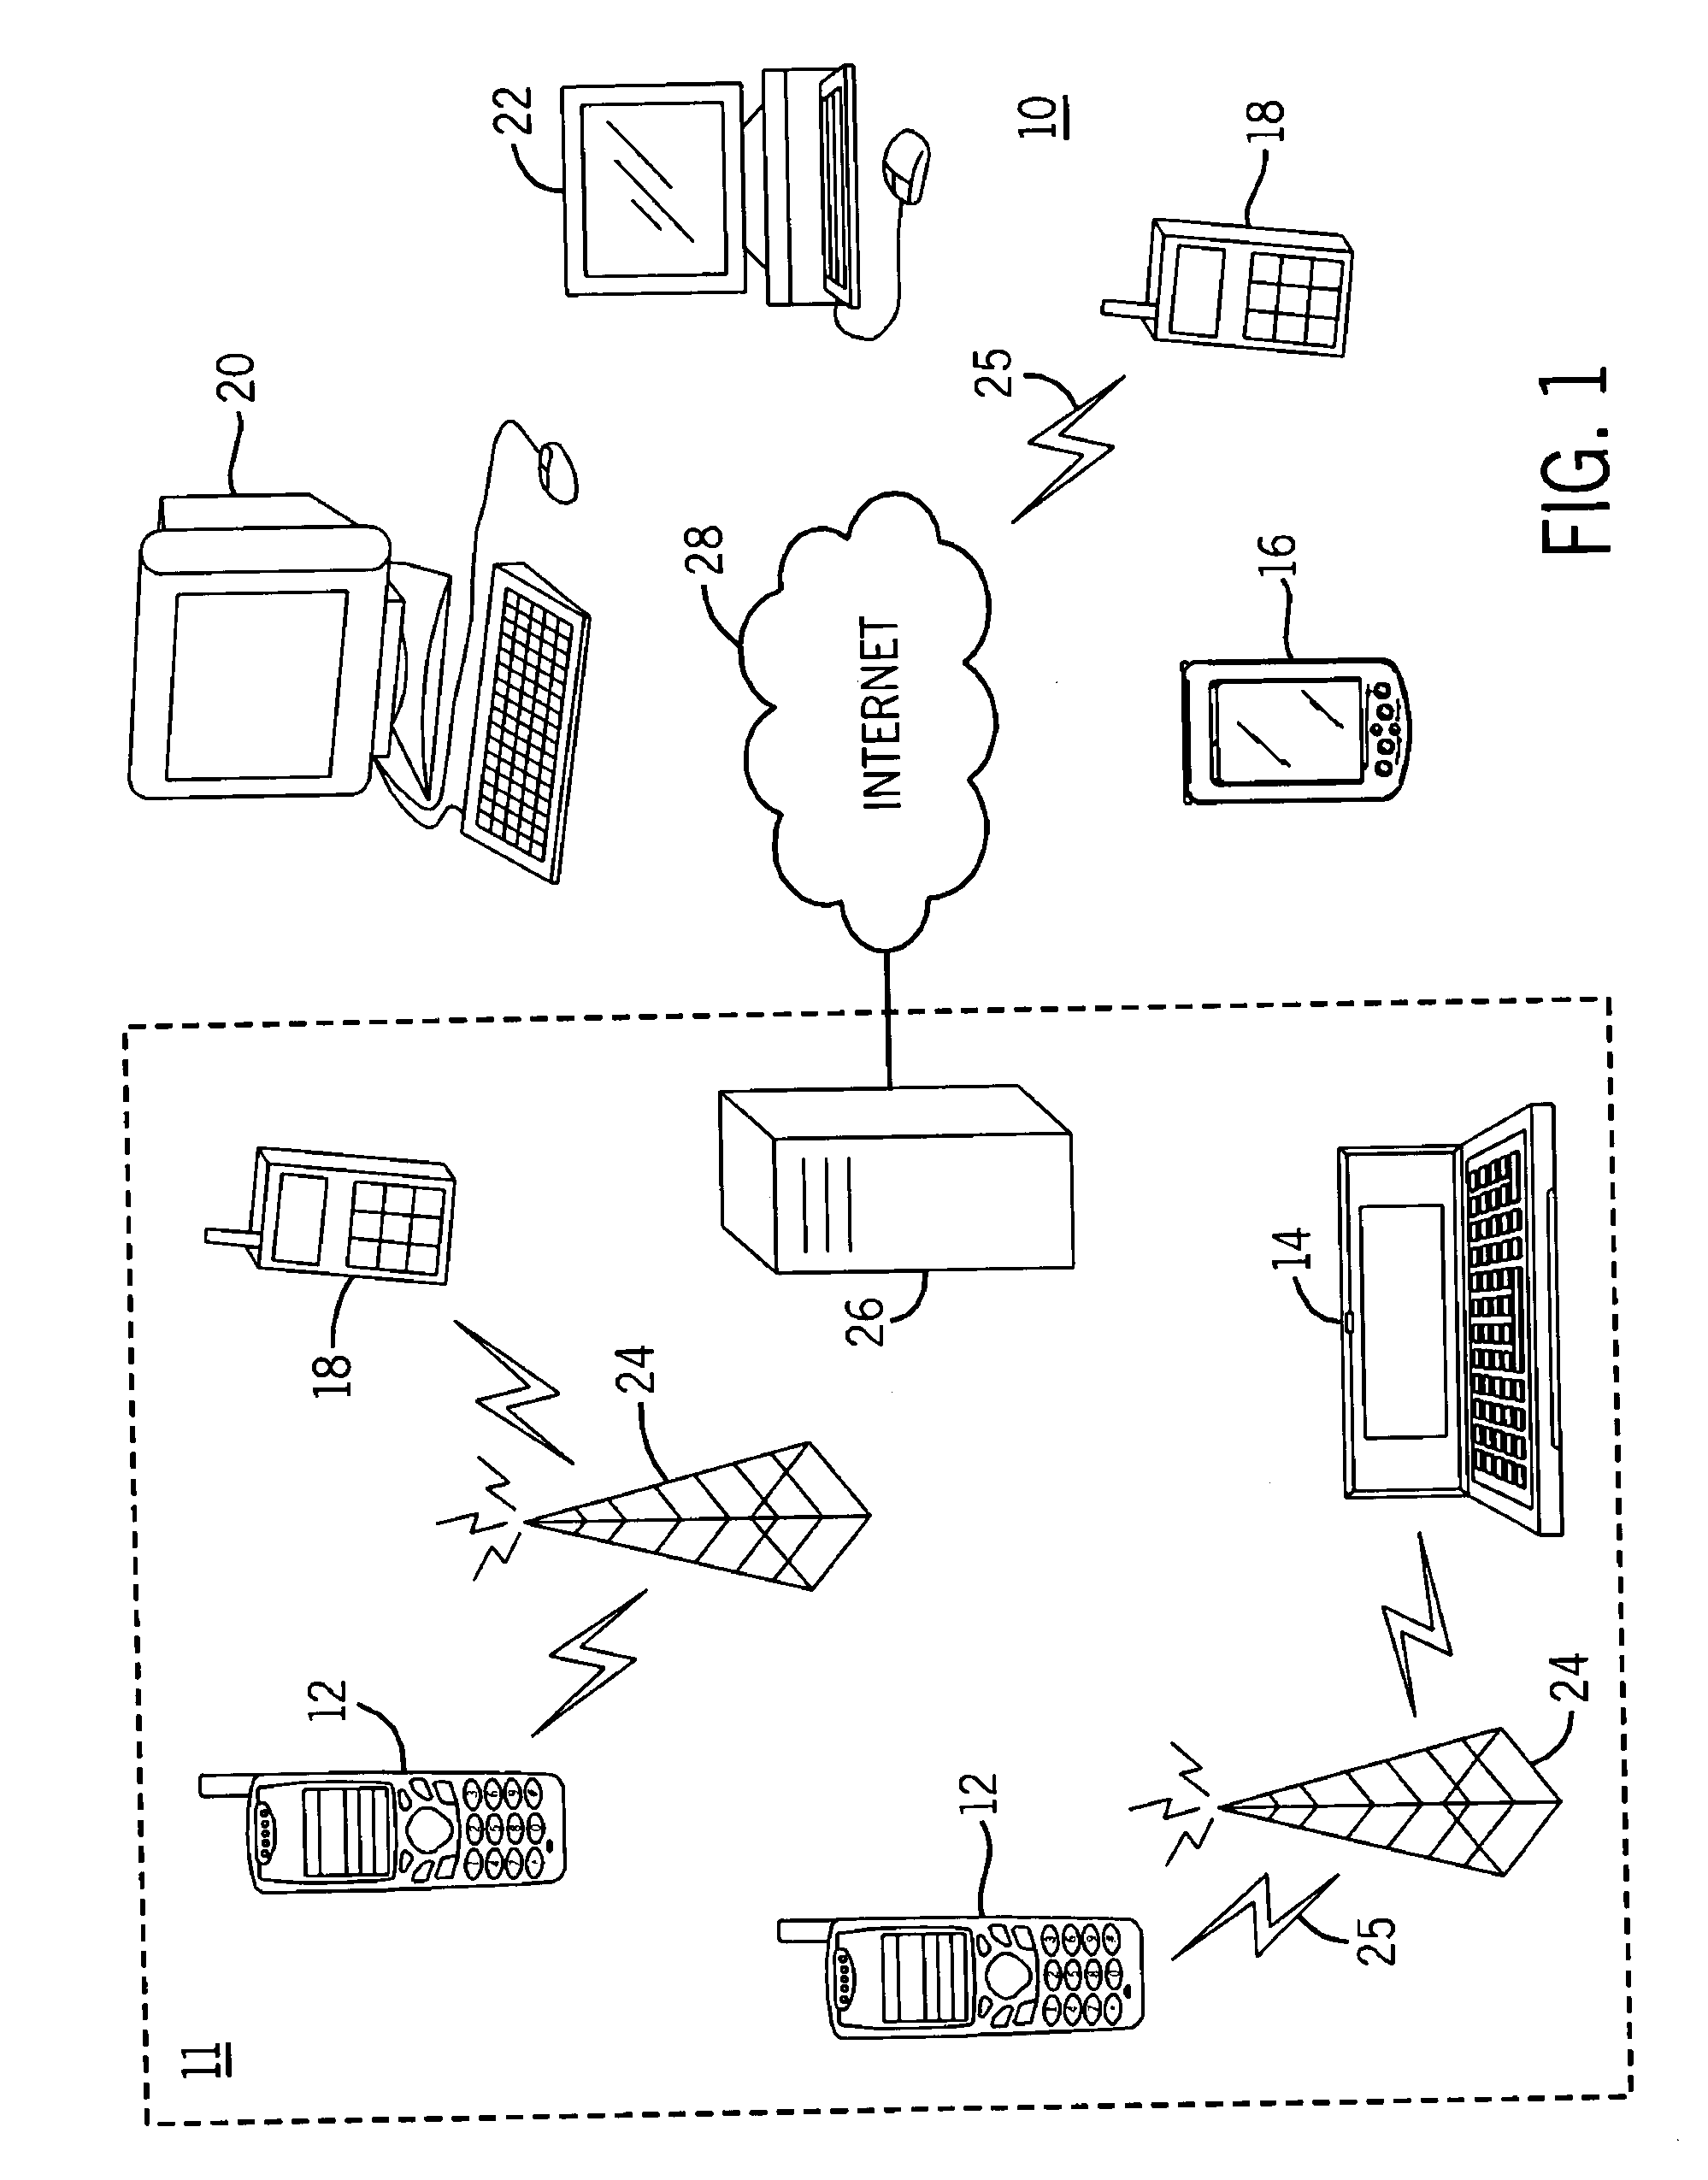 System and method for requesting remote care using mobile devices